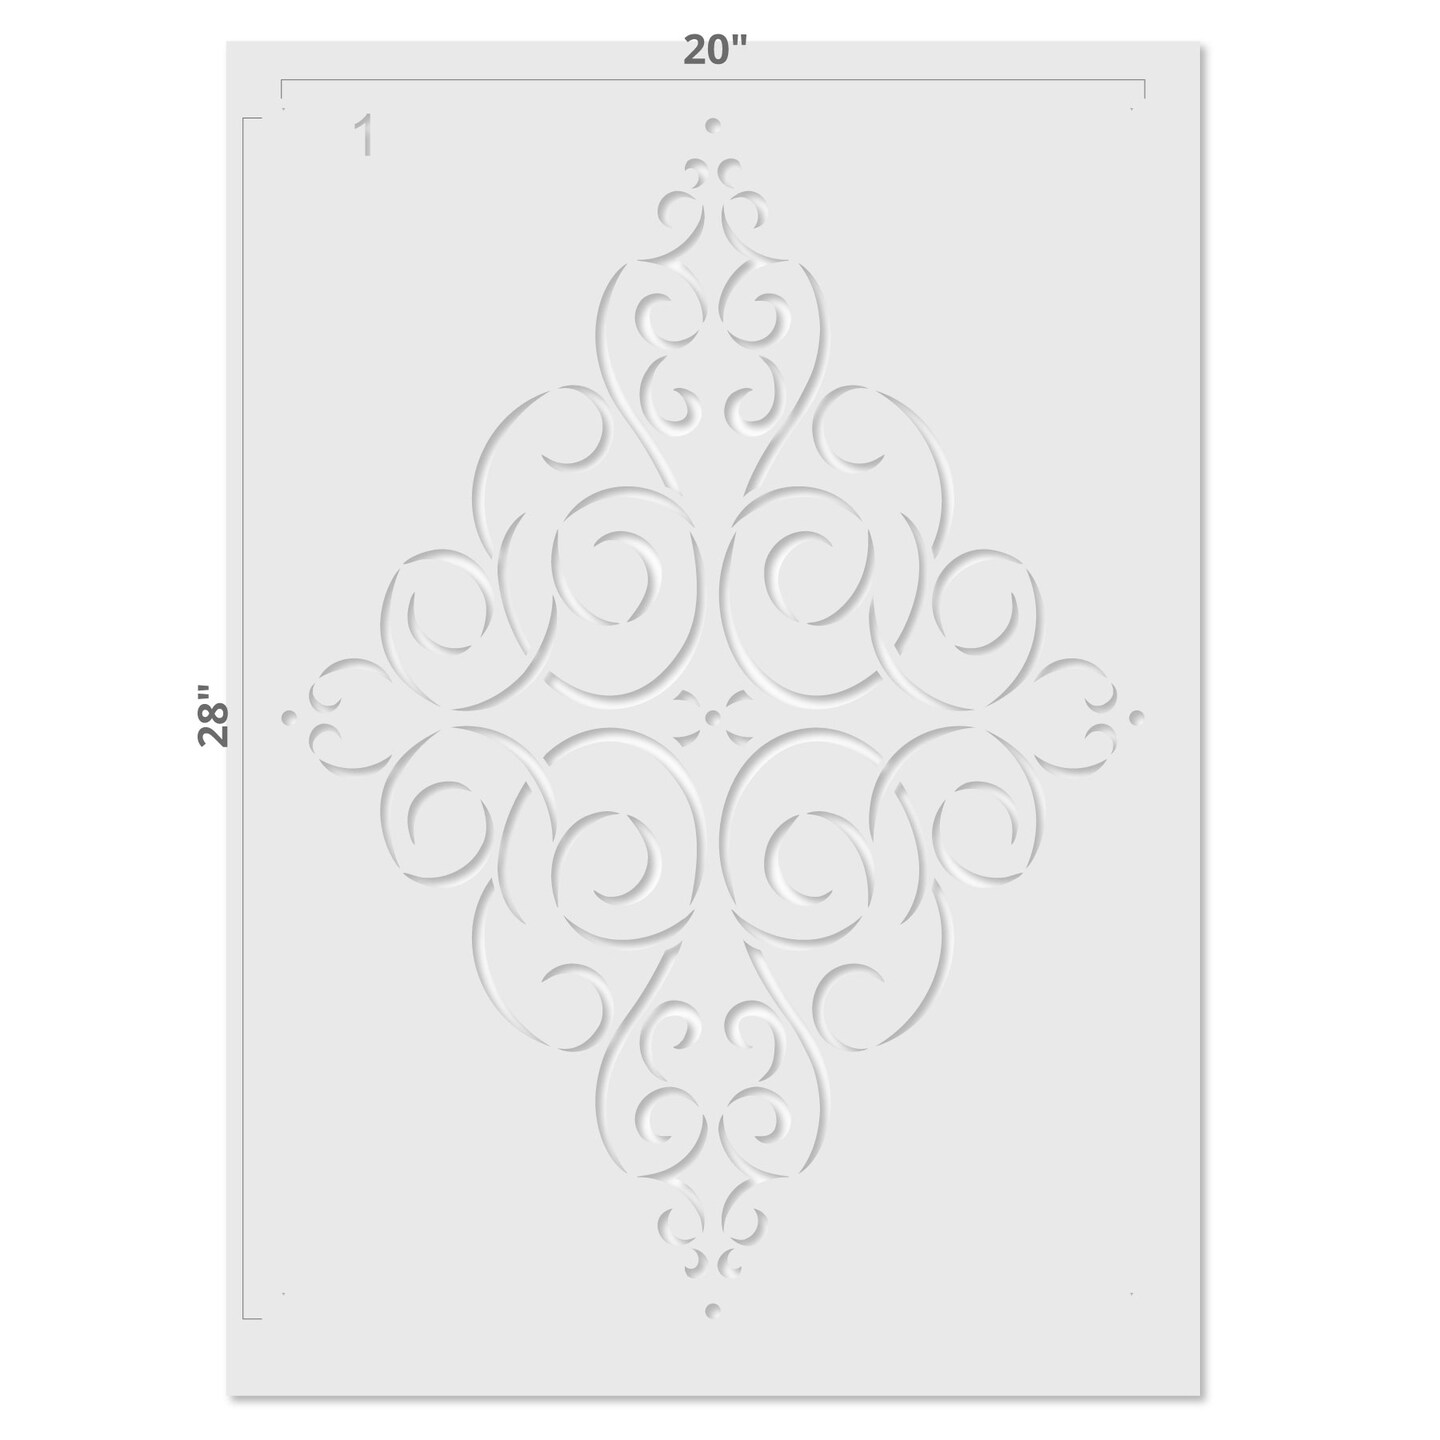 Large Diamond Medallion Wall Stencil | 3473 by Designer Stencils | Mandala &#x26; Medallion Stencils | Reusable Art Craft Stencils for Painting on Walls, Canvas, Wood | Reusable Plastic Paint Stencil for Home Makeover | Easy to Use &#x26; Clean Art Stencil